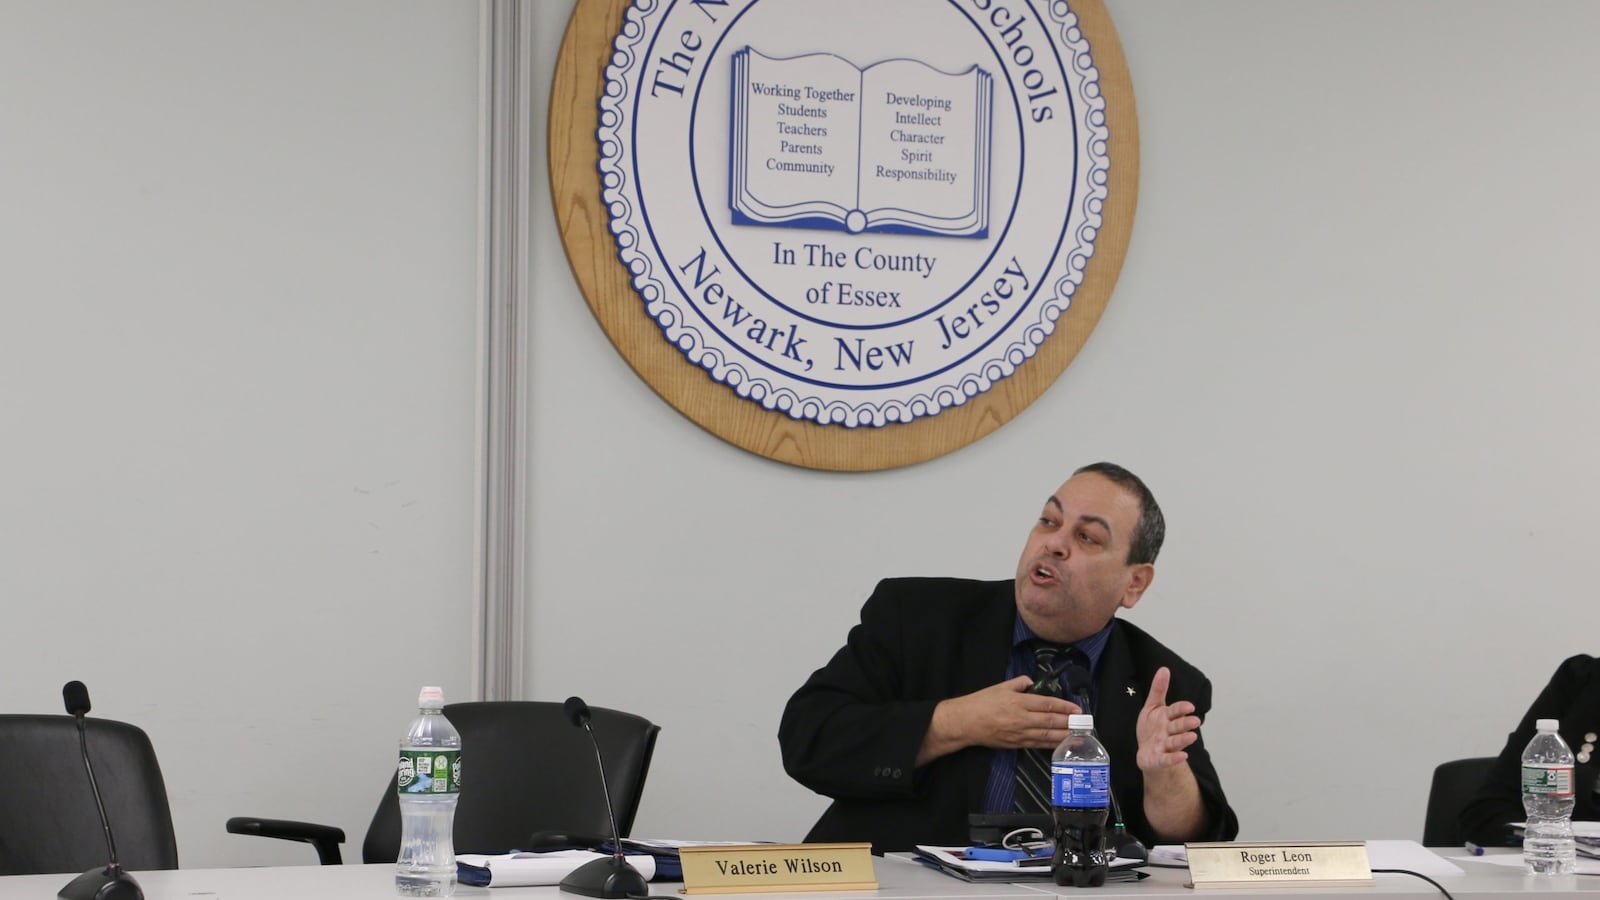 Newark Superintendent Roger León wants to reclaim building space as he seeks to expand the district.